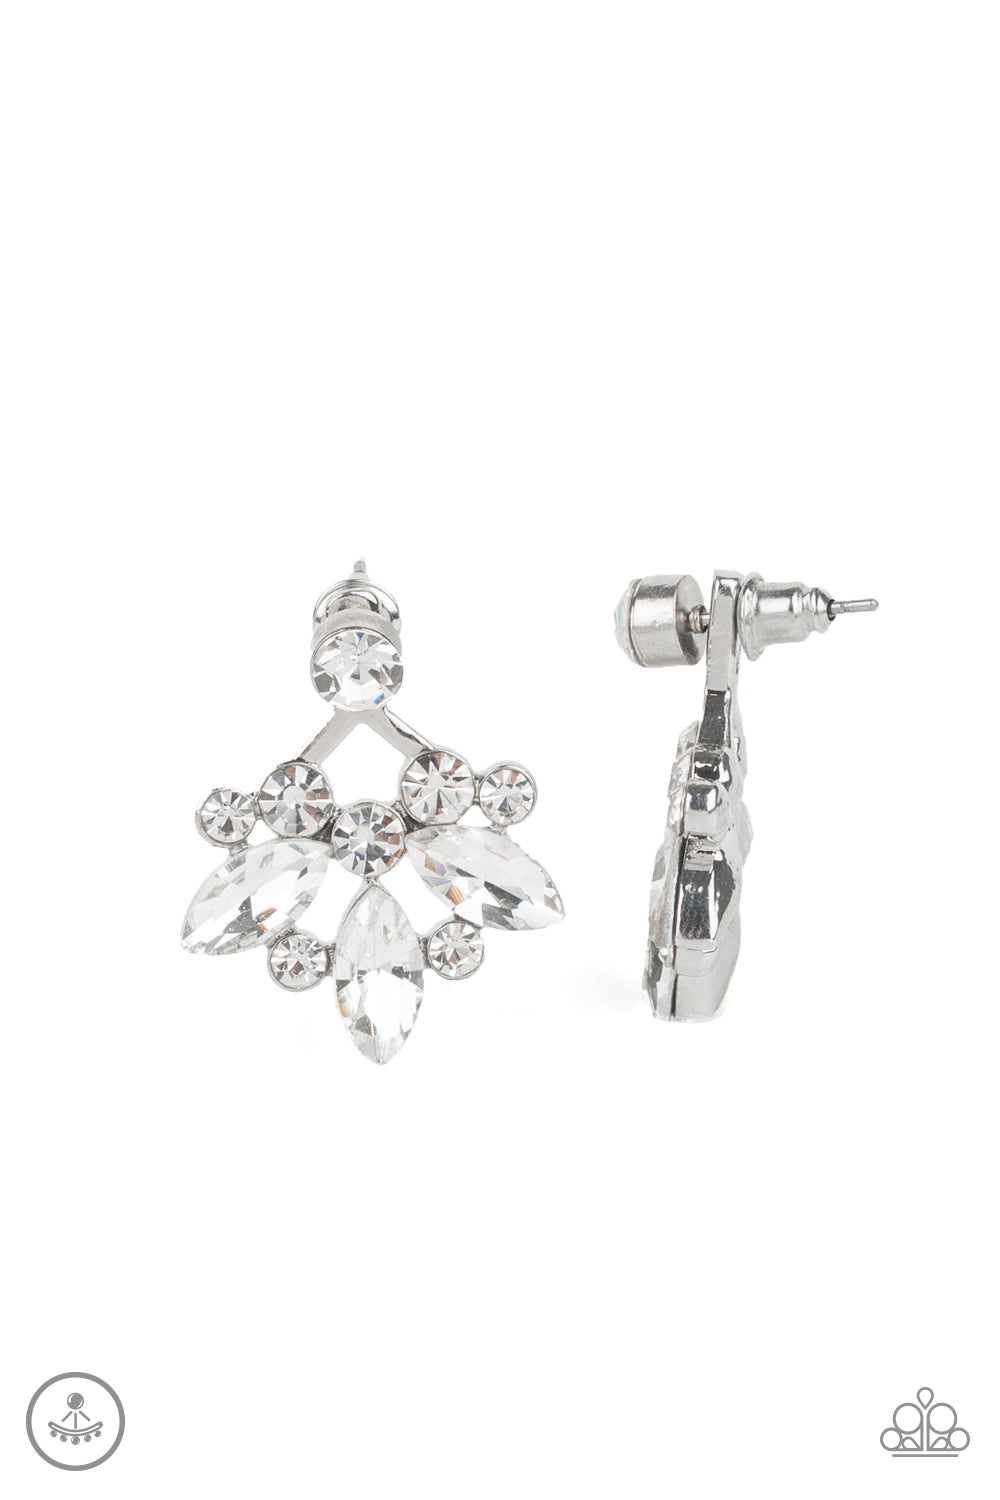 pittmanbling-and-jewelry-inc-presentscrystal-constellations-white-post earrings-paparazzi-accessories